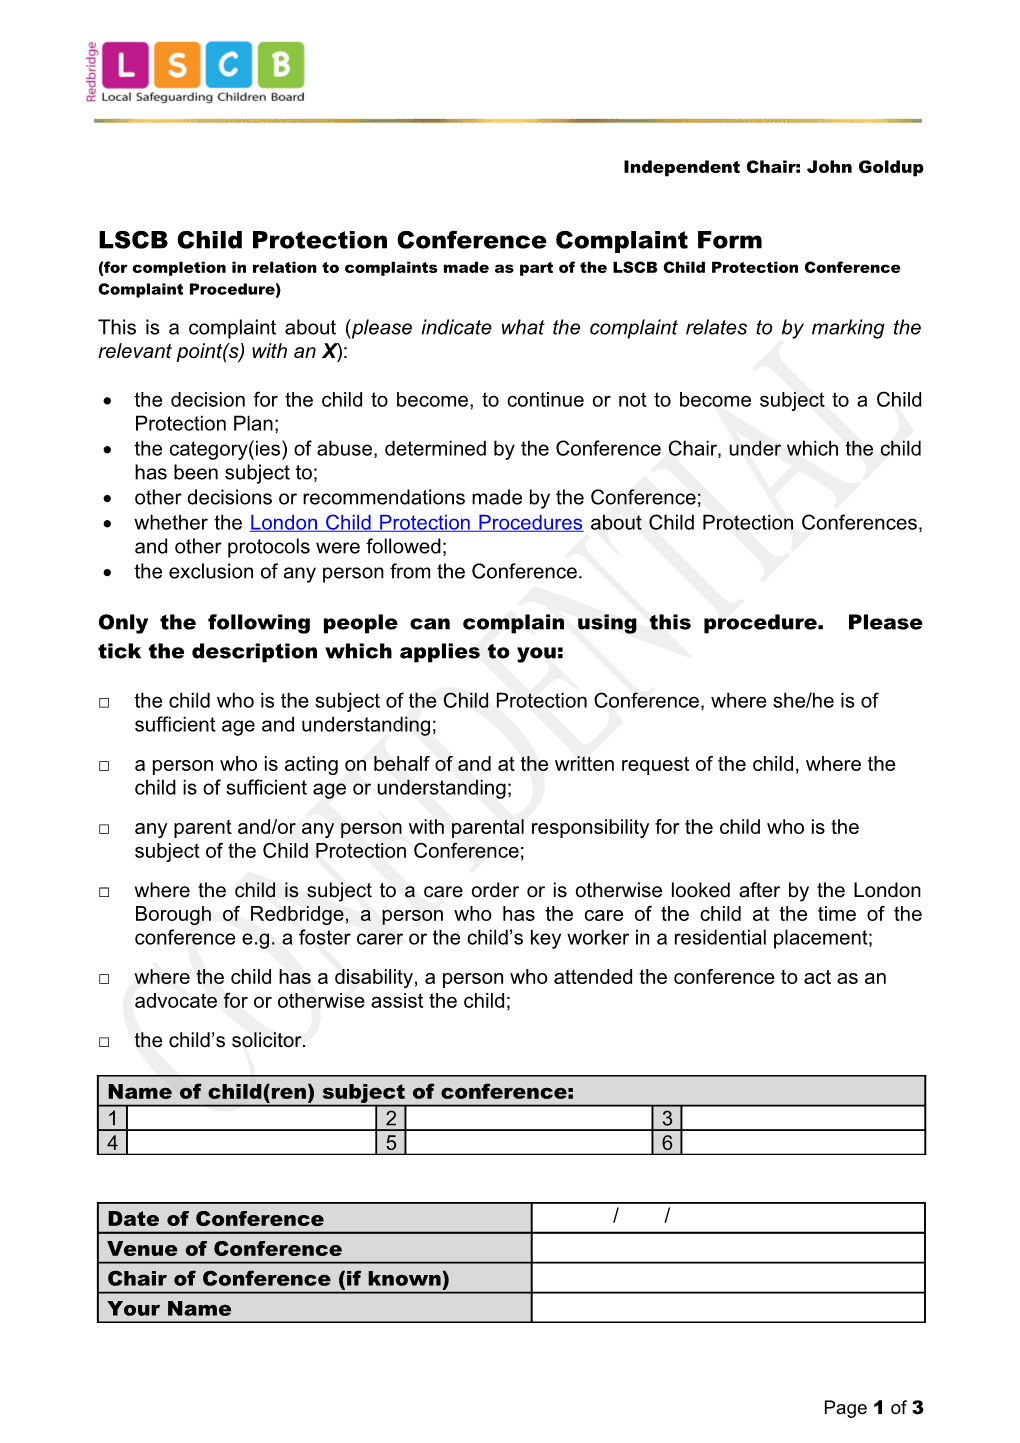 LSCB Child Protection Conference Complaint Form